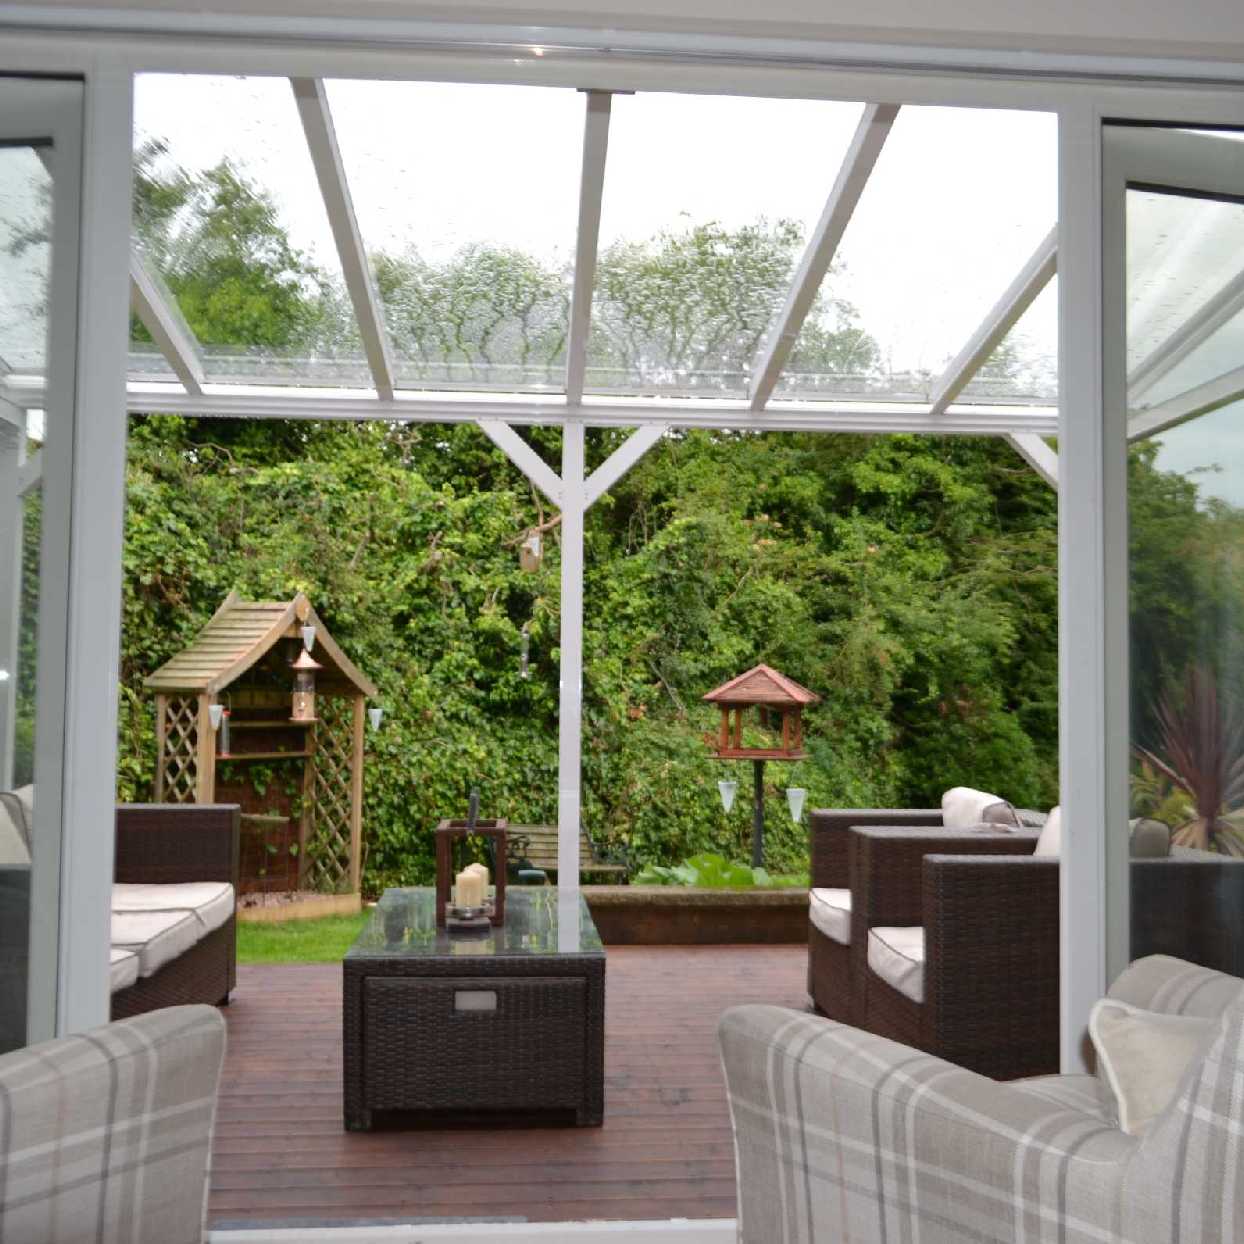 Great selection of Omega Smart Lean-To Canopy, White UNGLAZED for 6mm Glazing - 2.1m (W) x 2.0m (P), (2) Supporting Posts